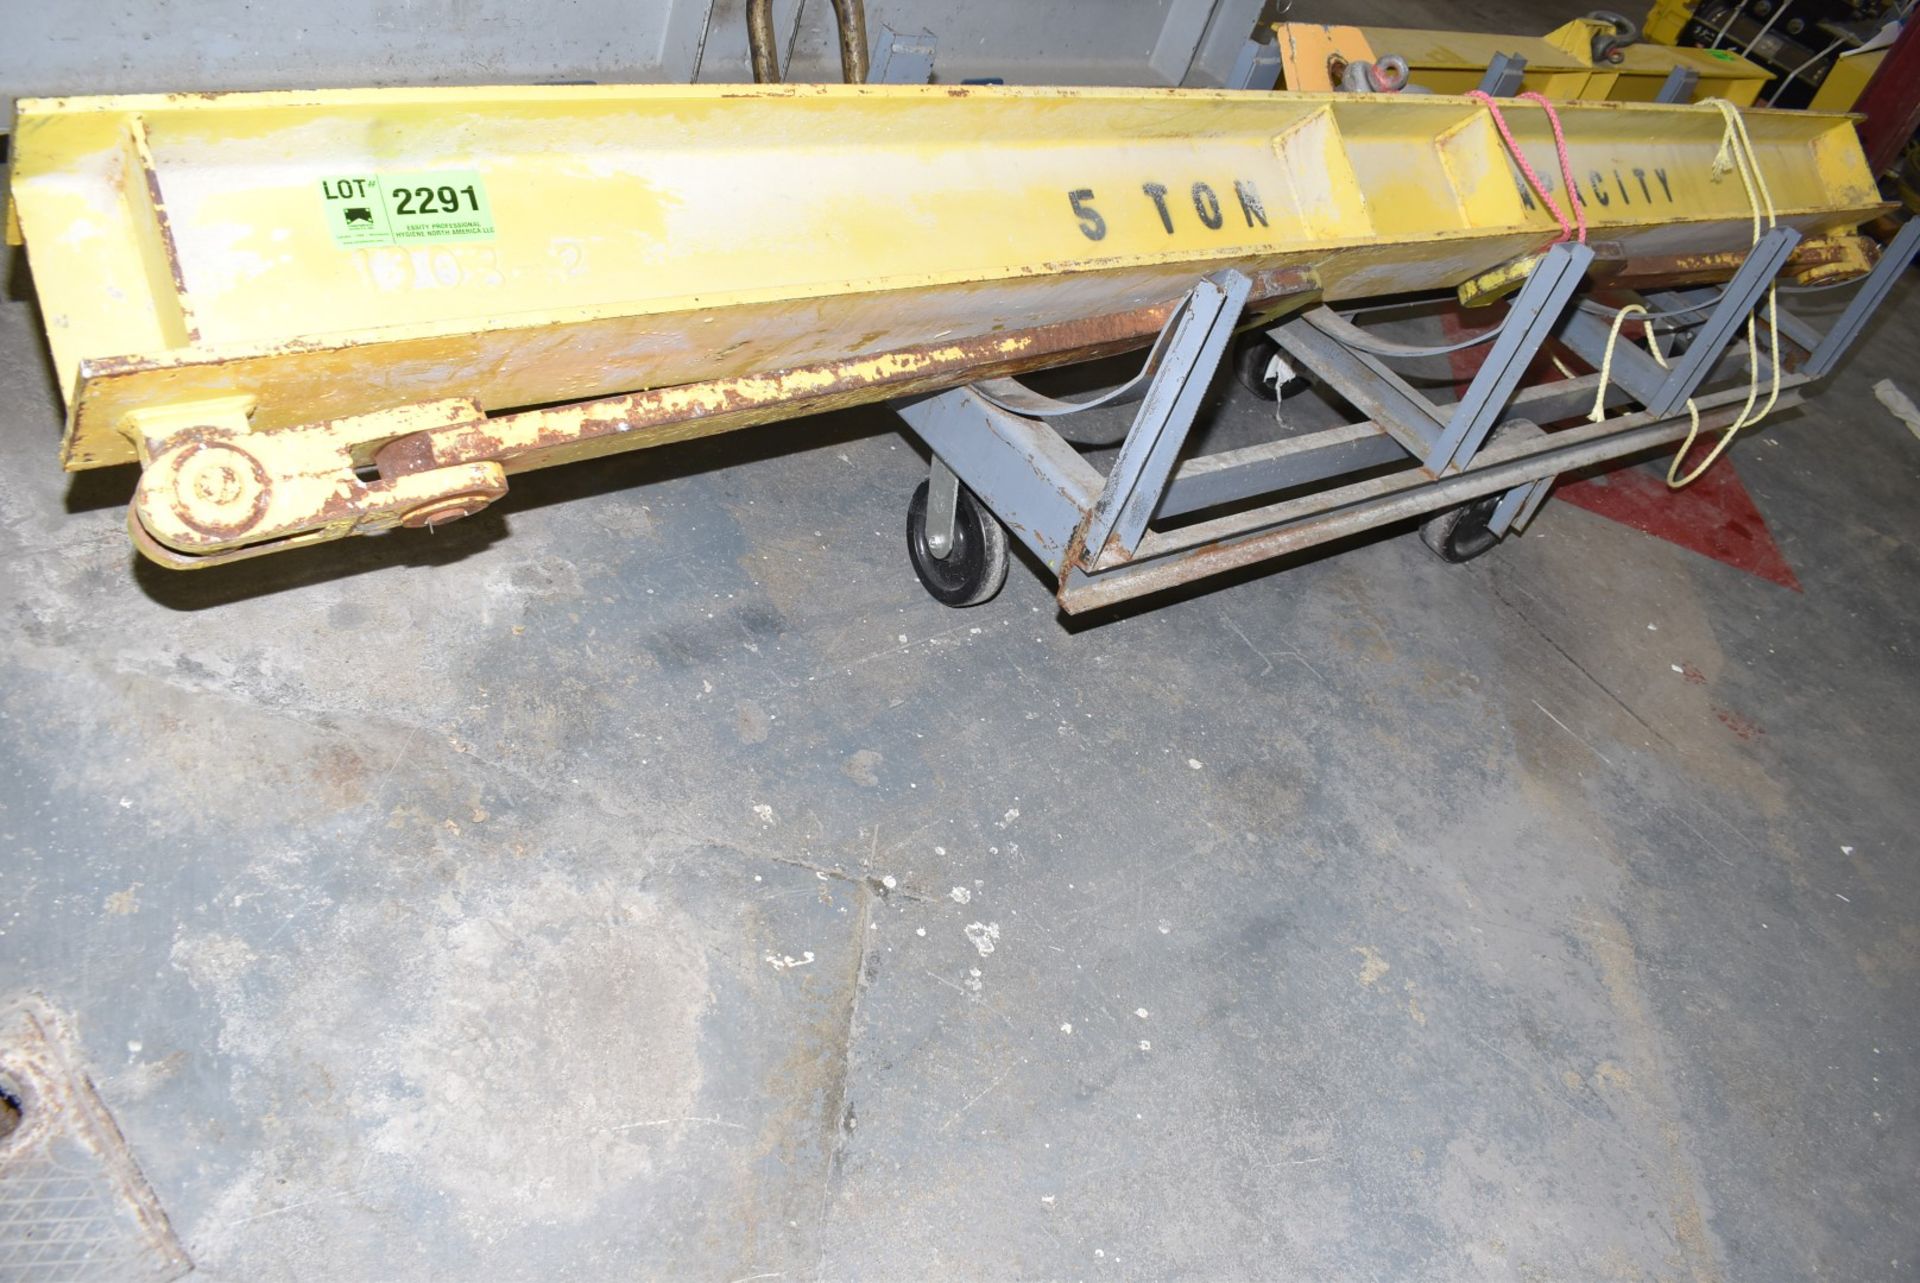 LOT/ 5 TON CAPACITY SPREADER BEAM WITH HOOKS, 162" SPAN & CART [RIGGING FEES FOR LOT #2291 - $50 USD